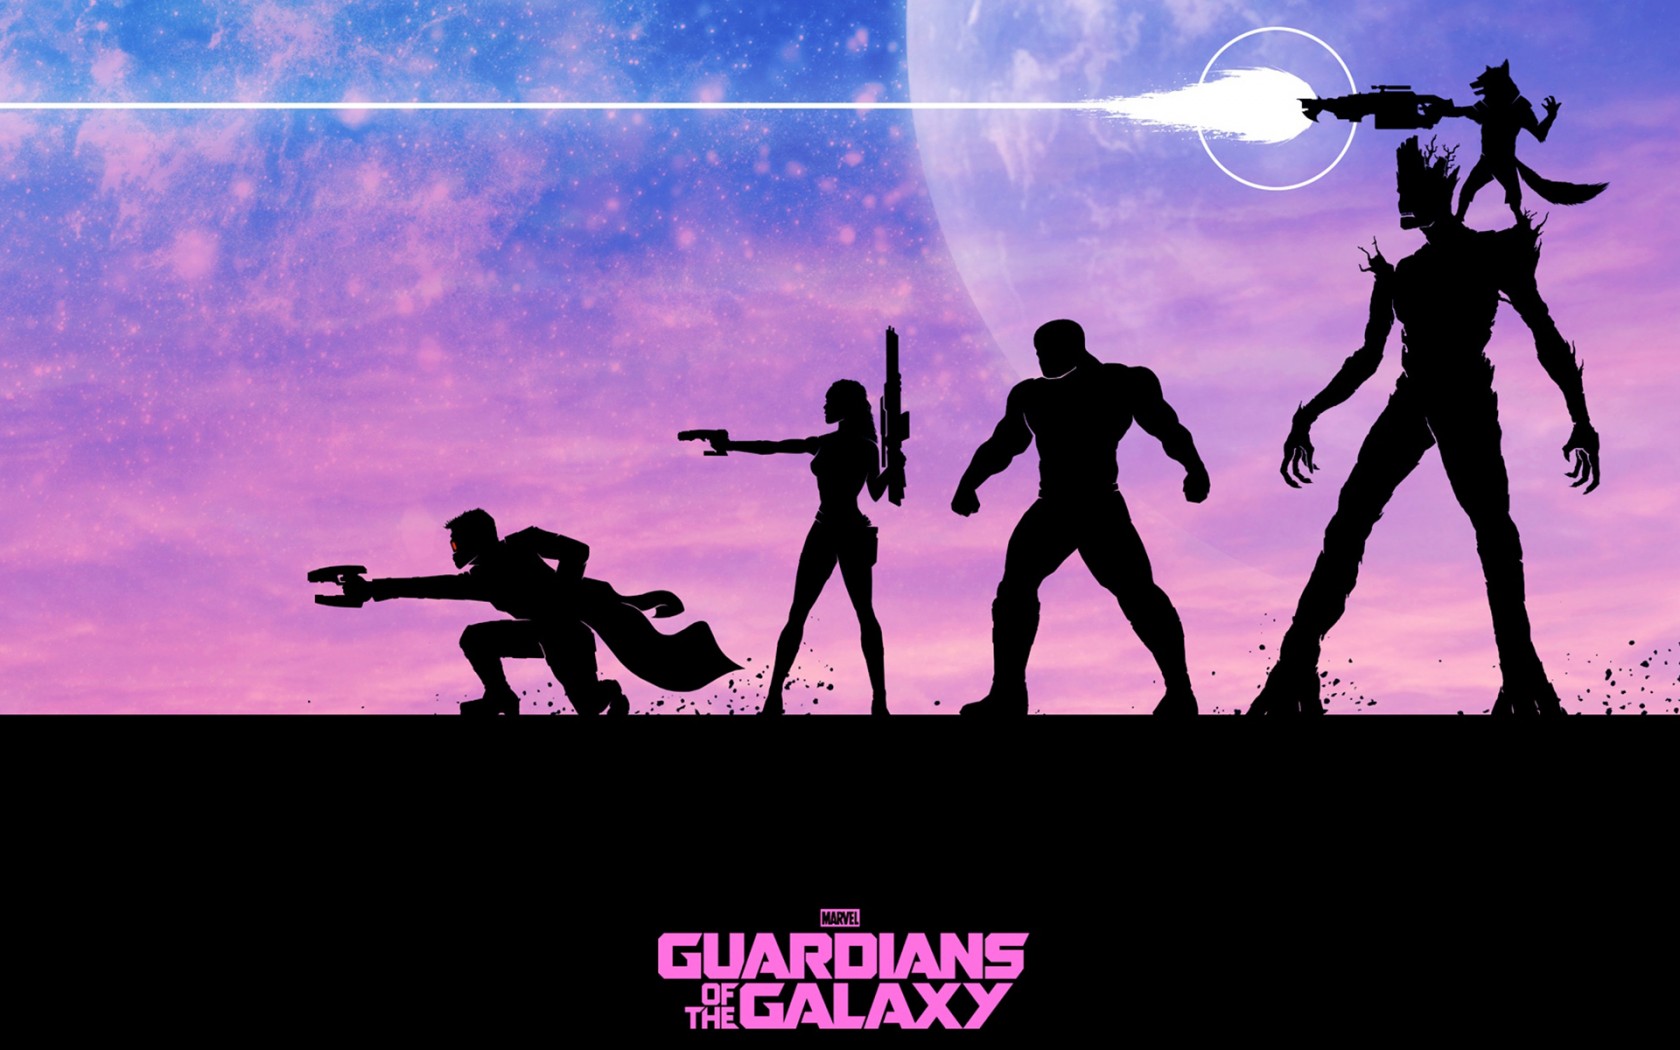 Guardians of the galaxy cast